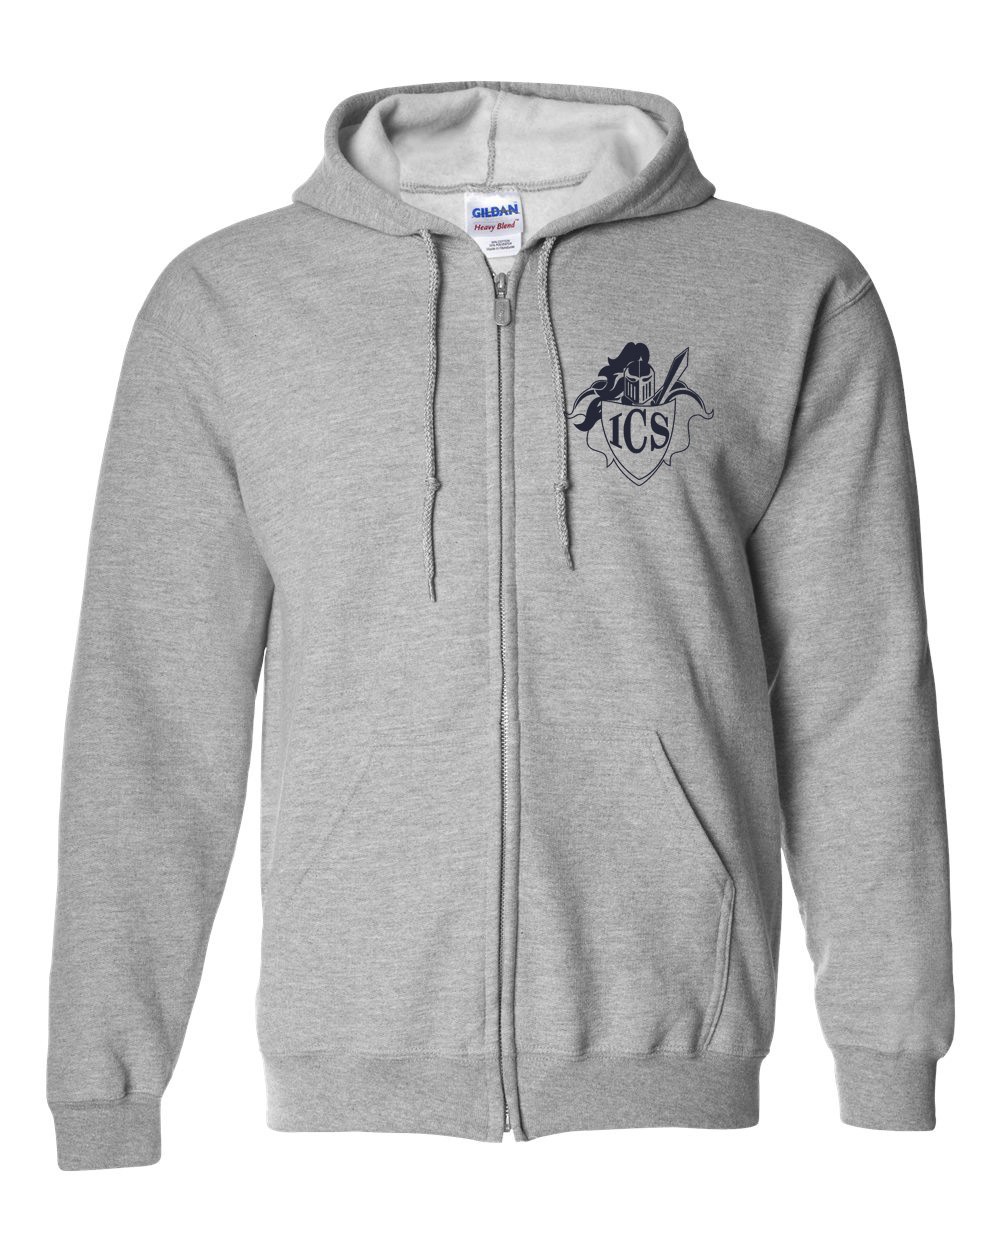 ICS Staff Zipper Hoodie w/ Navy Logo #F17- Please allow 2-3 Weeks for Delivery